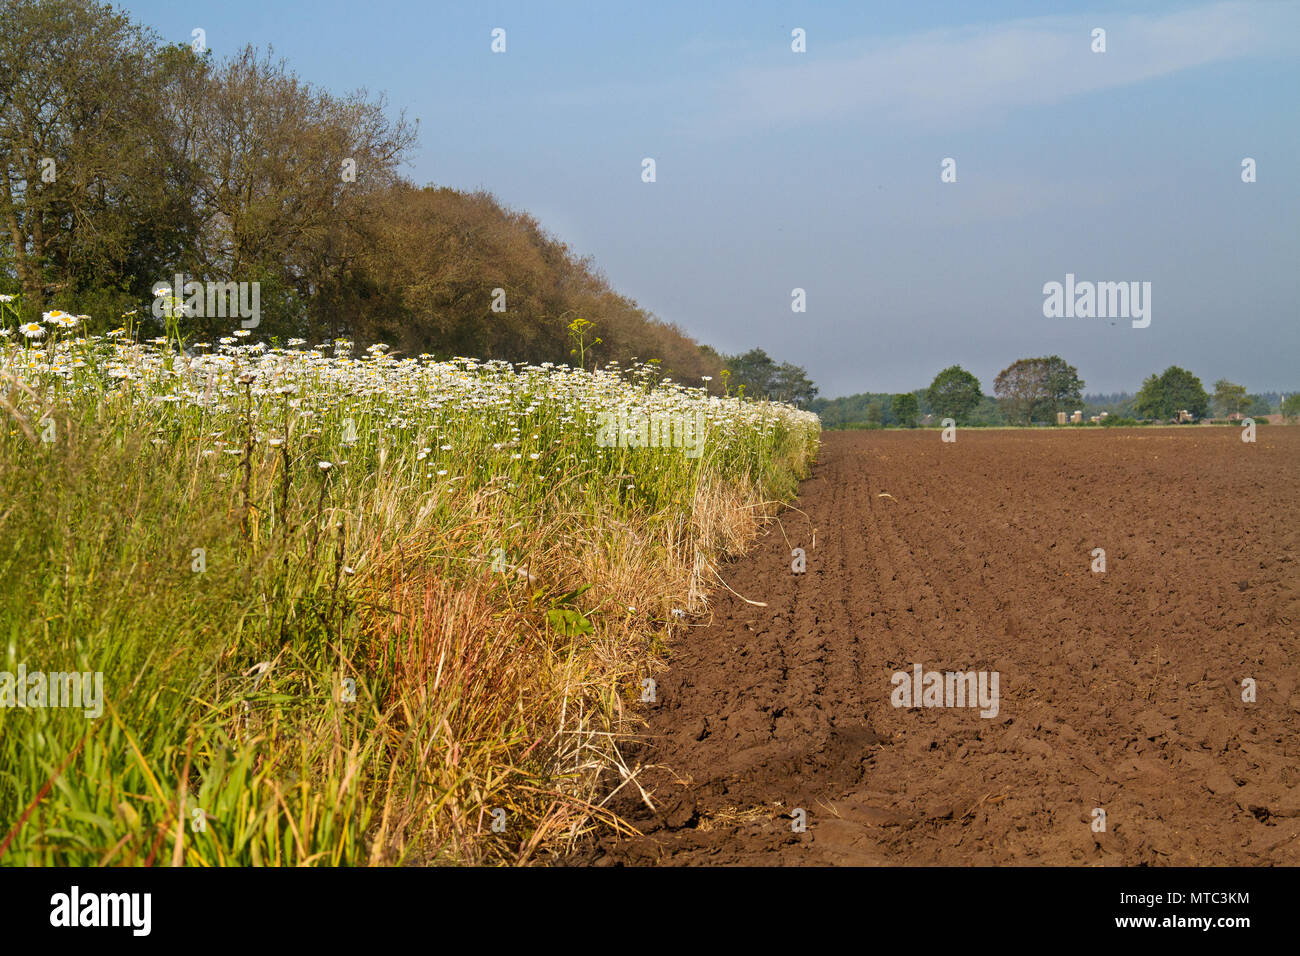 Organic pest control: field of flowers, sown to attract beneficial insects, next to an agricultural field Stock Photo